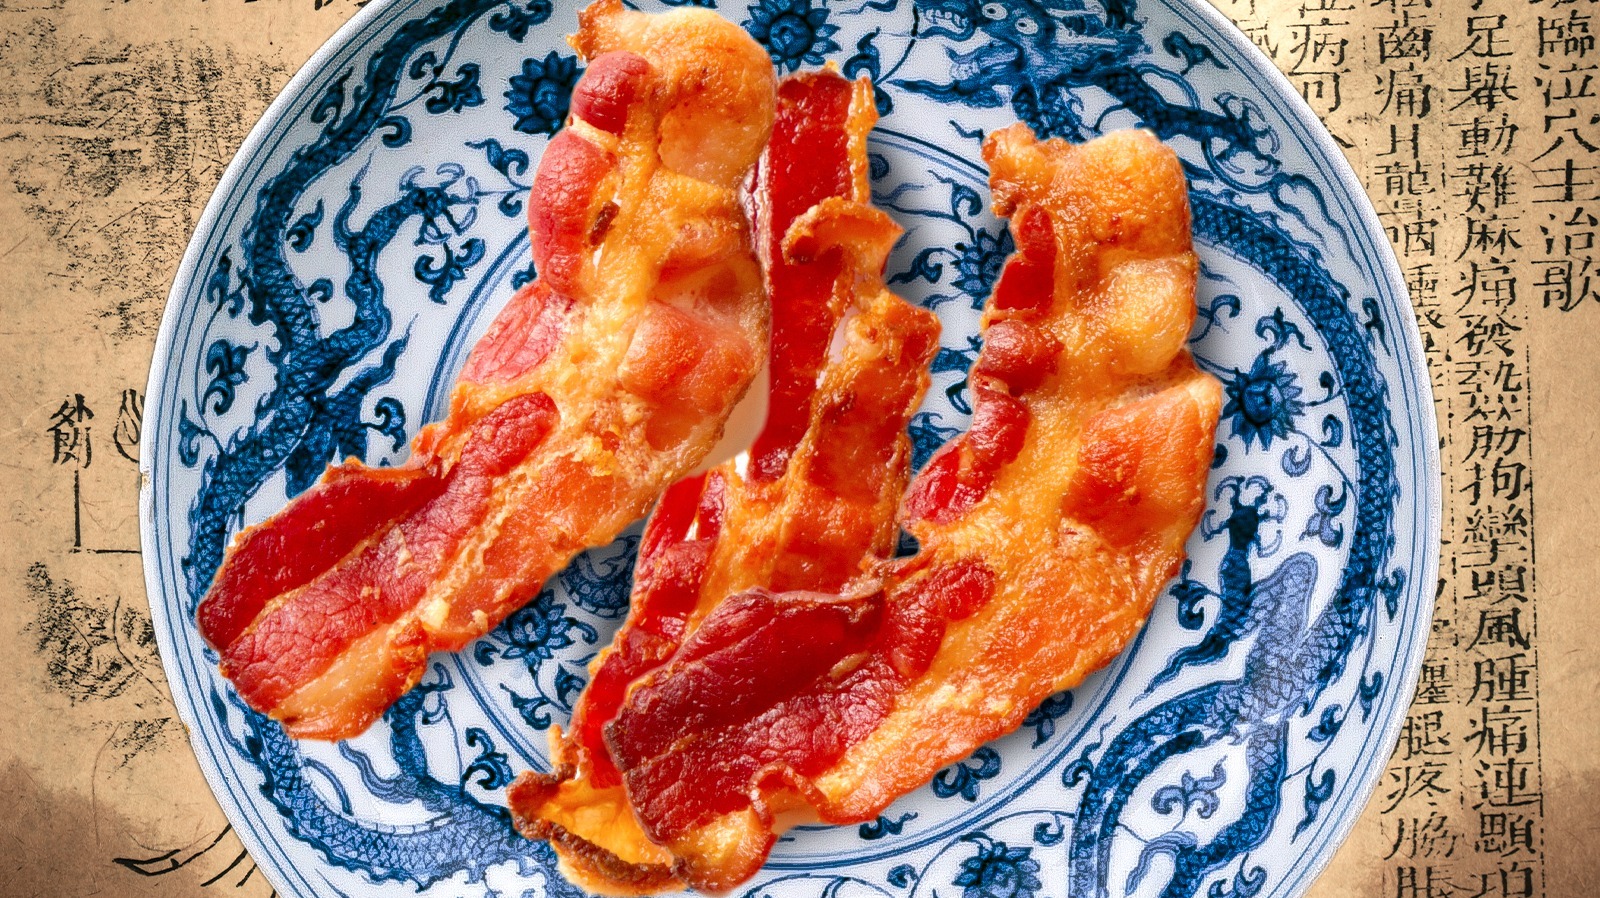 Specialty bacon remain strong